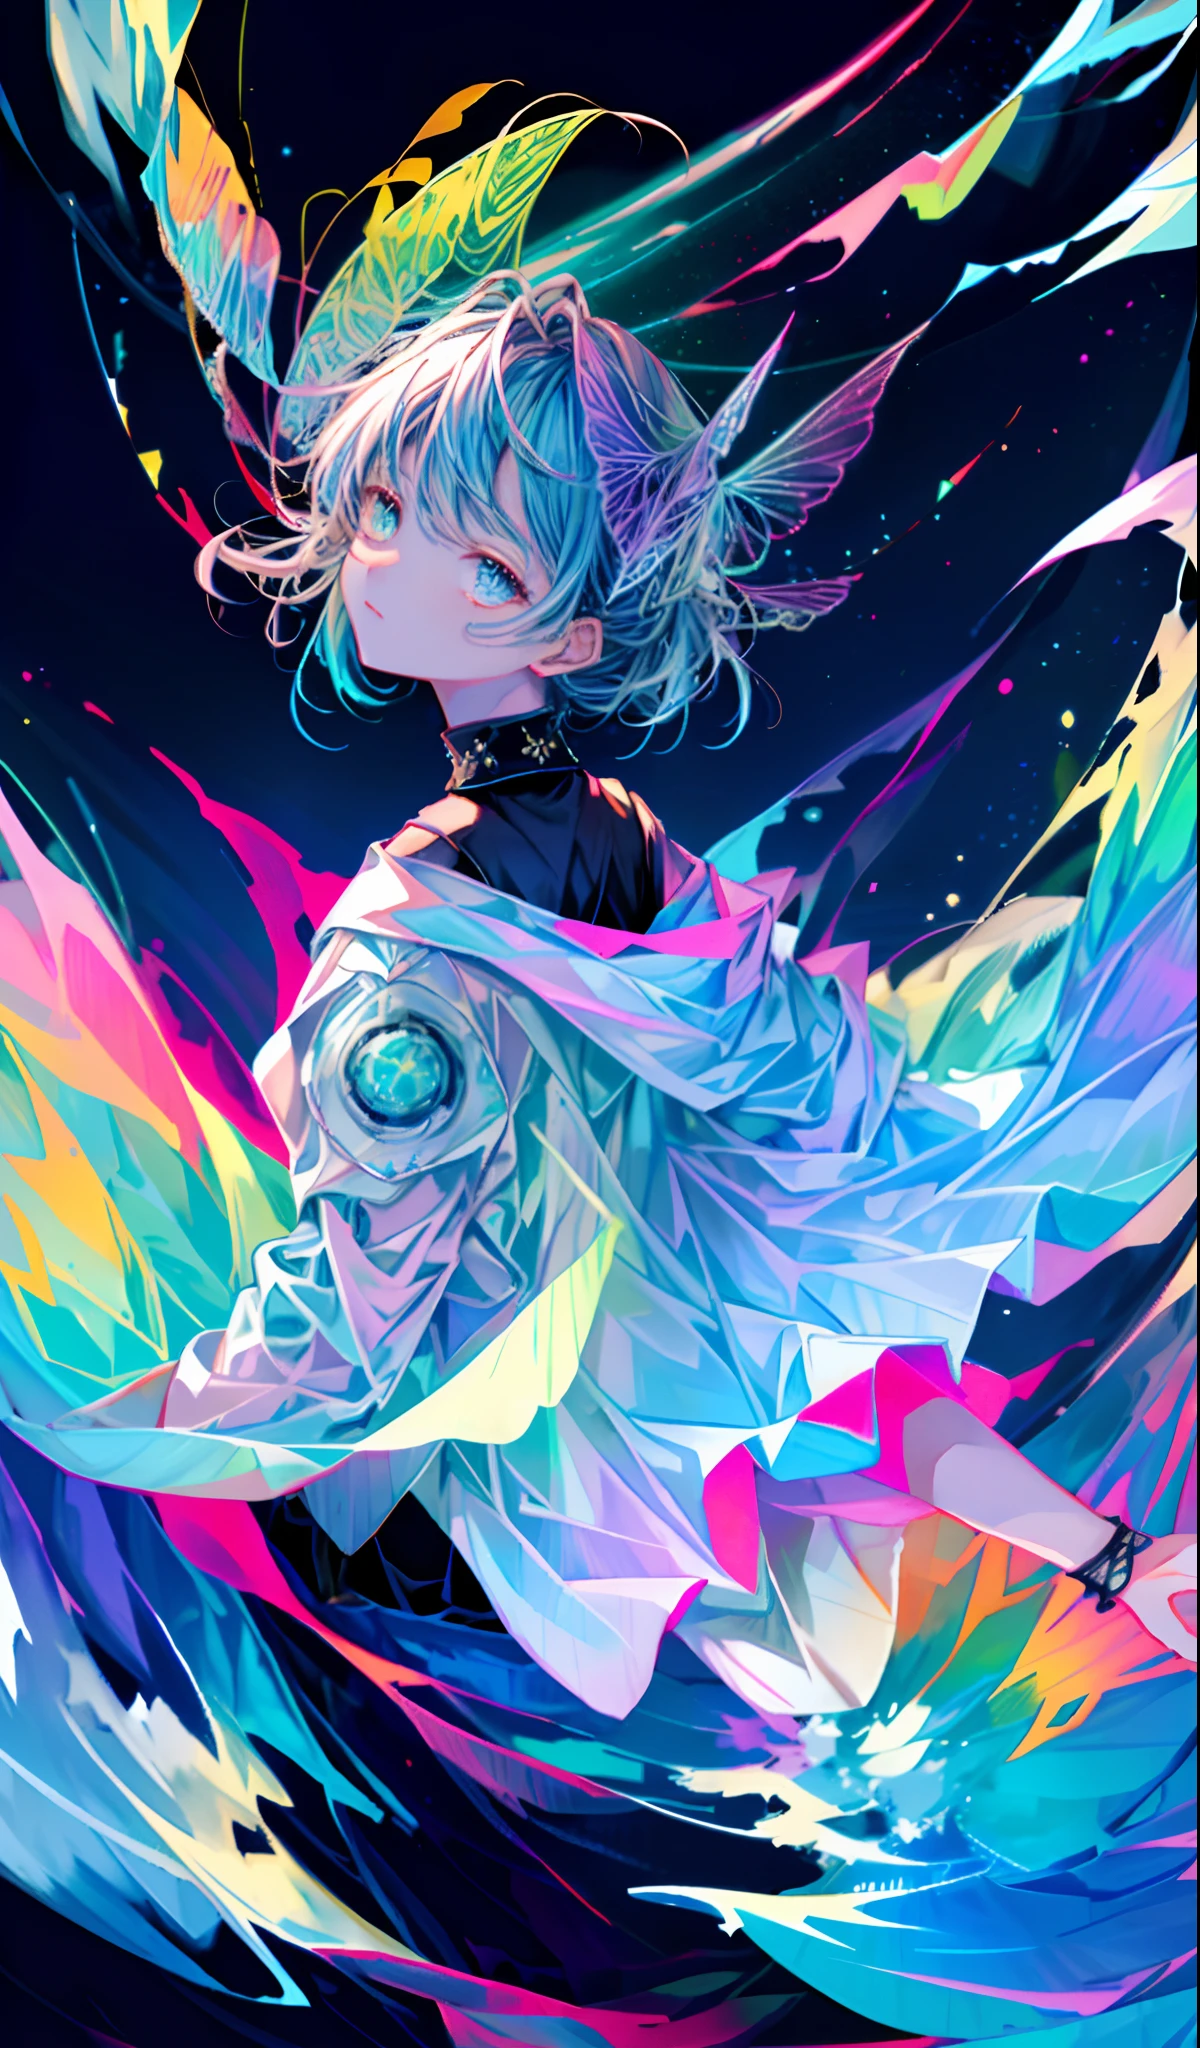 Cute iridescent round monster in space、Iridescent grass々Drawing a butterfly flying over the water, Looking up at the starry sky. Surround her with colorful nebulae and colorful forests.